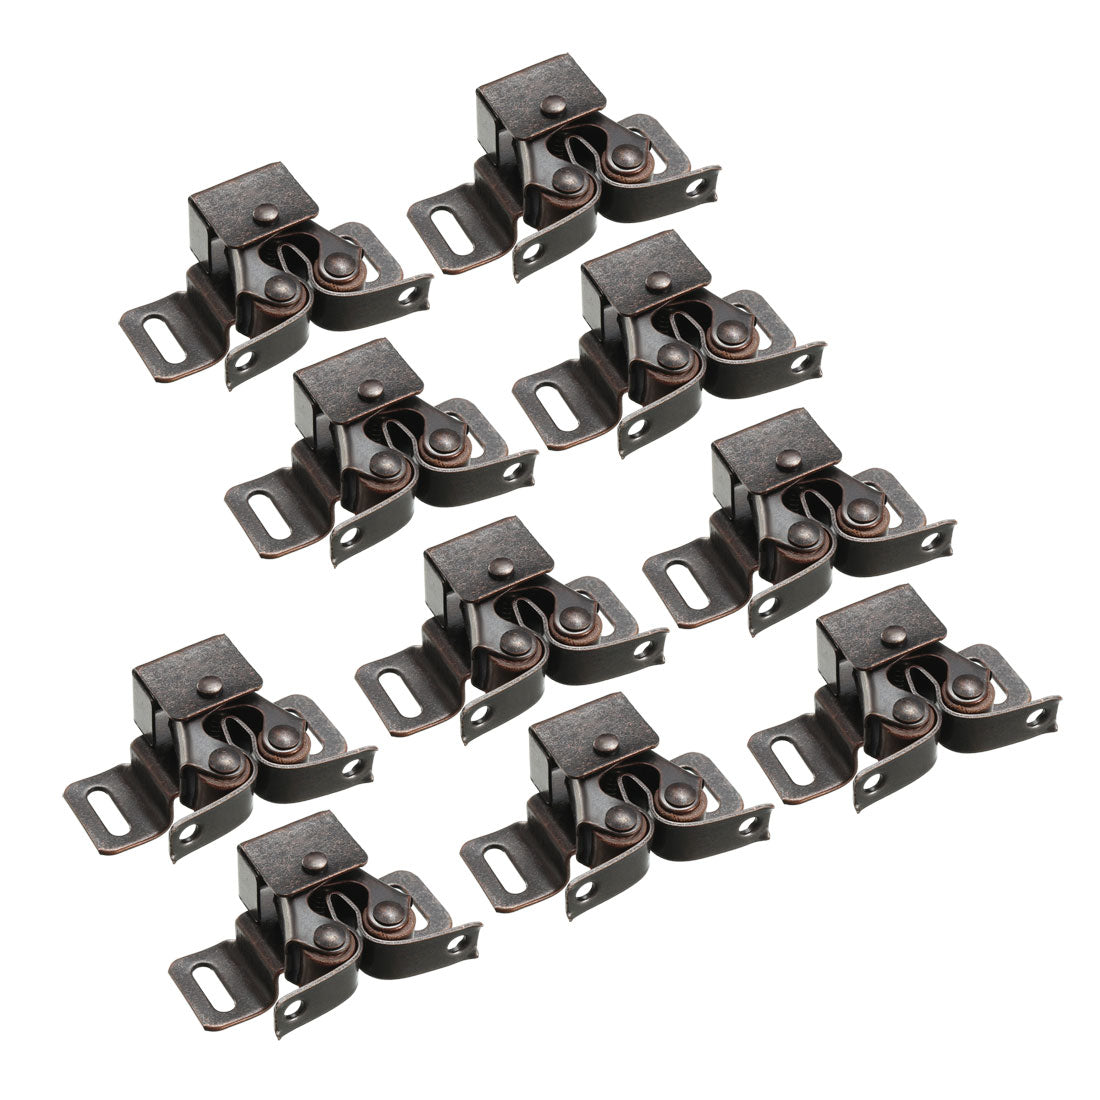 uxcell Uxcell Retro Cabinet Door Double Roller Catch Ball Latch with Prong Hardware Copper Tone 10pcs